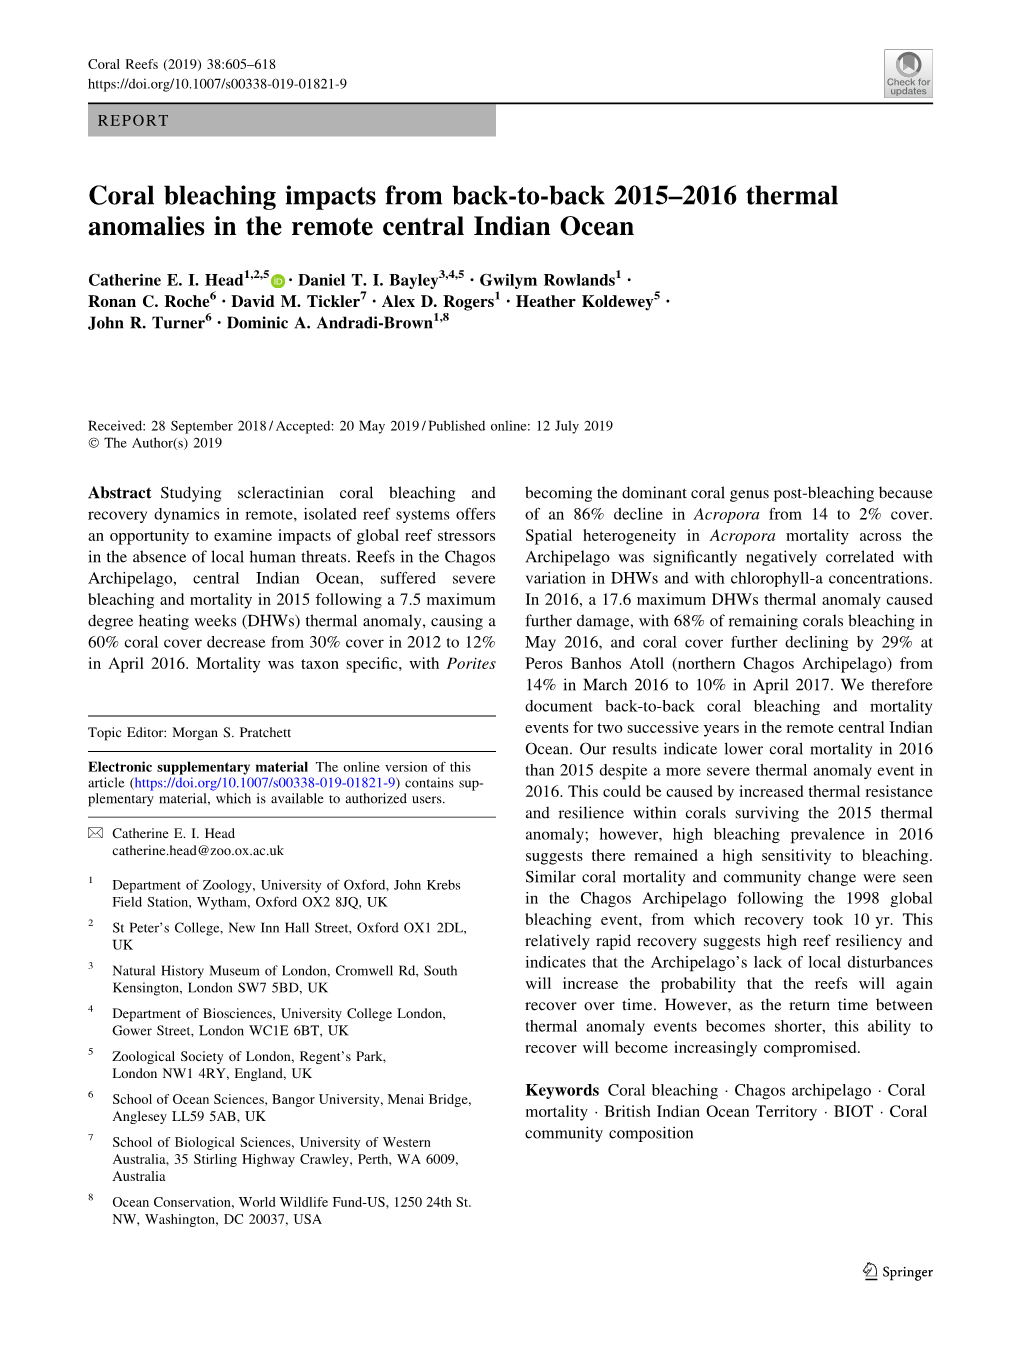 Coral Bleaching Impacts from Back-To-Back 2015–2016 Thermal Anomalies in the Remote Central Indian Ocean